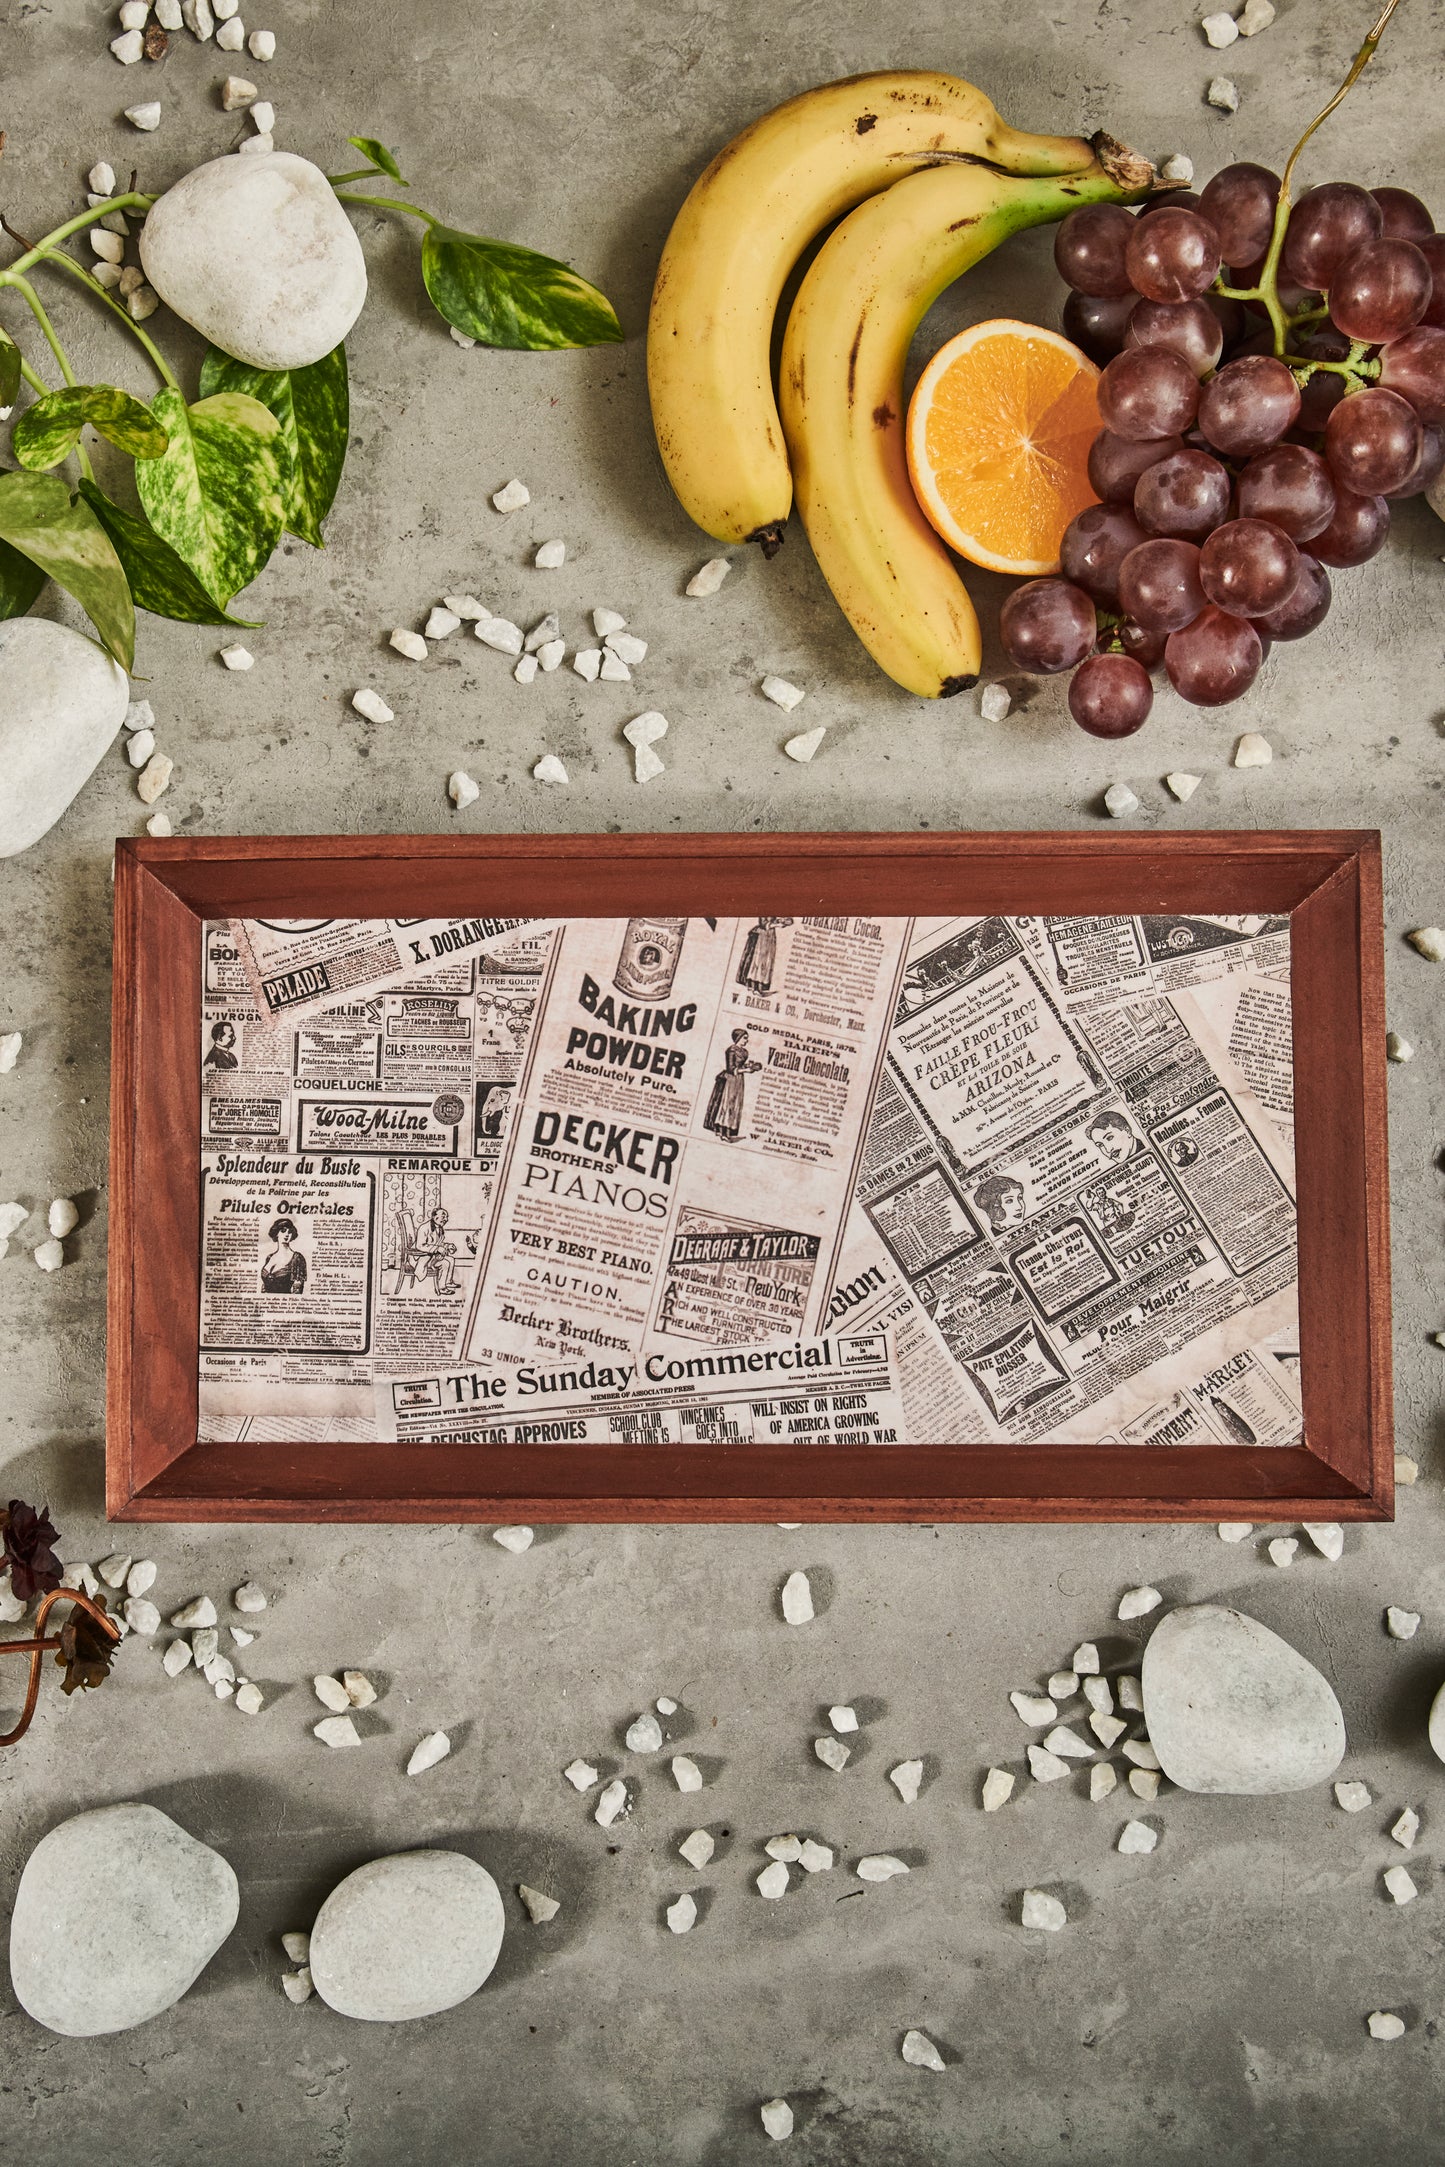 A Tiny Mistake Vintage Newspaper Rectangle Wooden Serving Tray, 35 x 20 x 2 cm